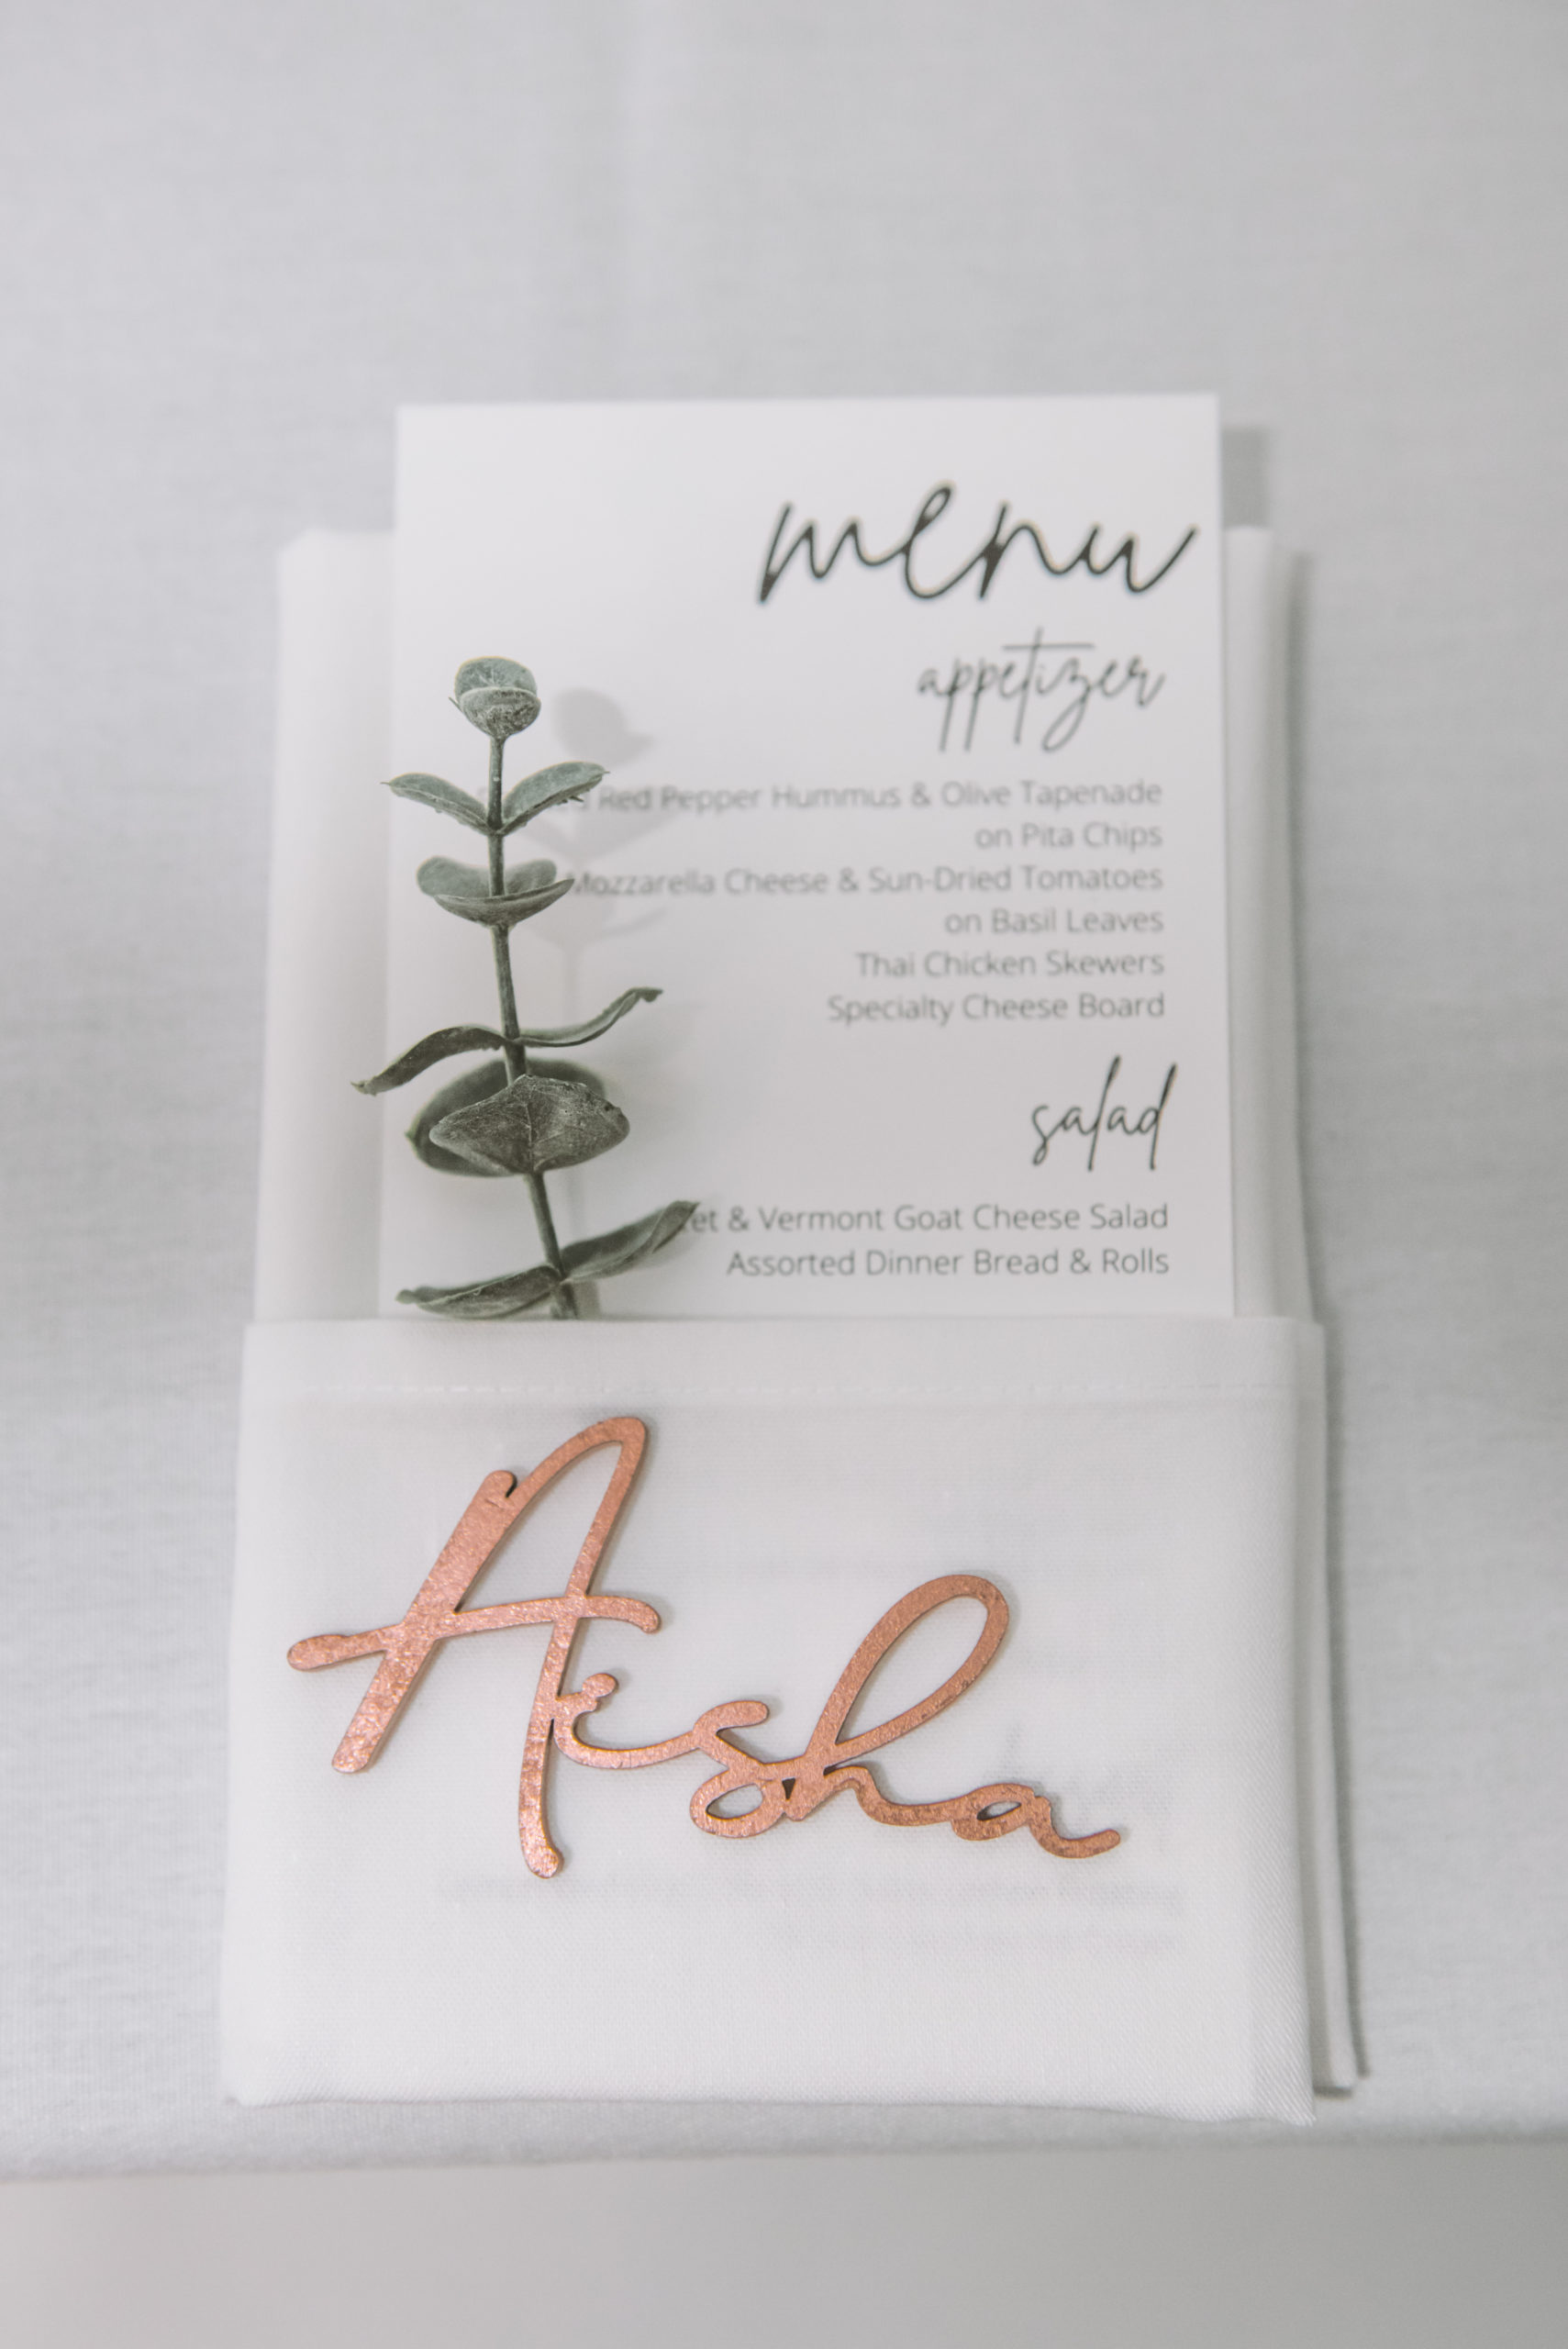 Detail of an individual placesetting for "Aisha" written out as a wooden namecard atop a white cloth napkin which has the menu and a piece of greenery in its pocket.